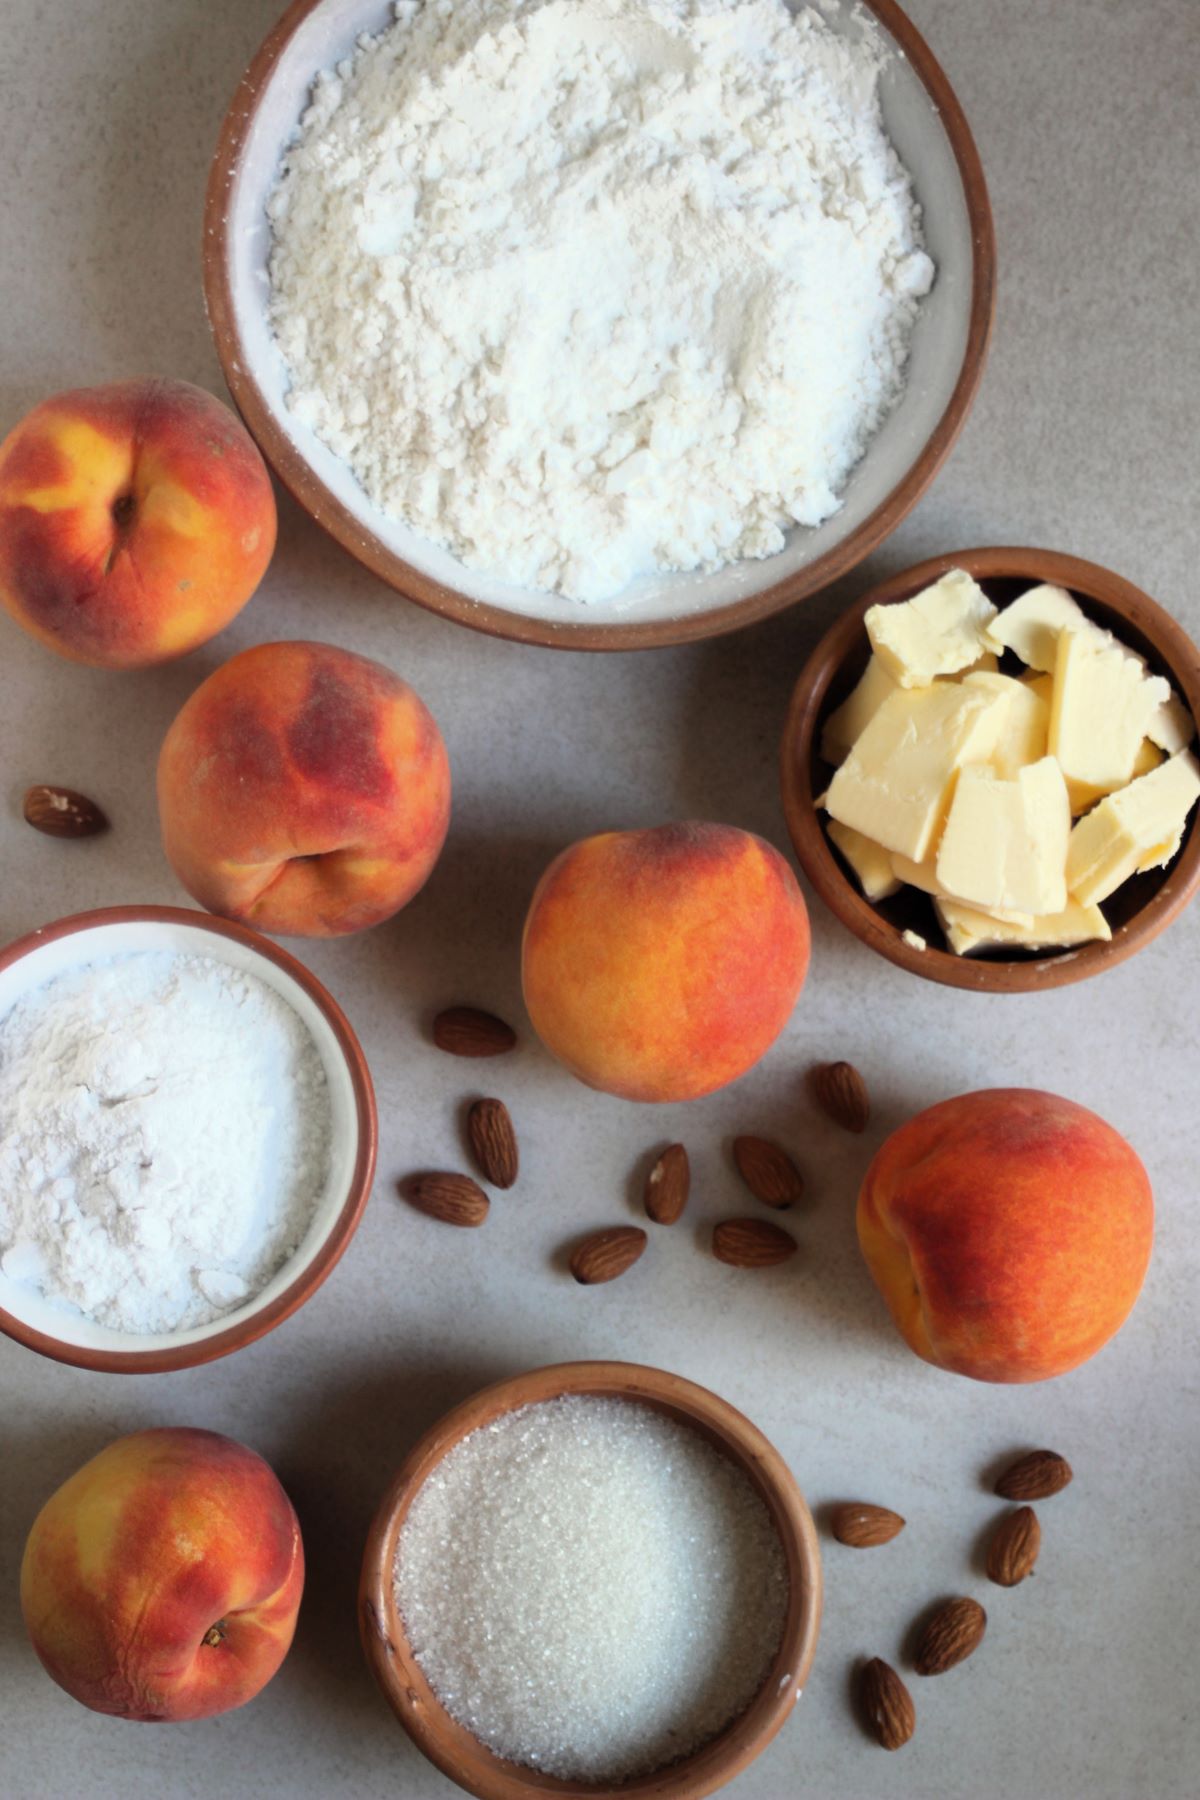 Peach galette ingredients on a white surface seen from above.